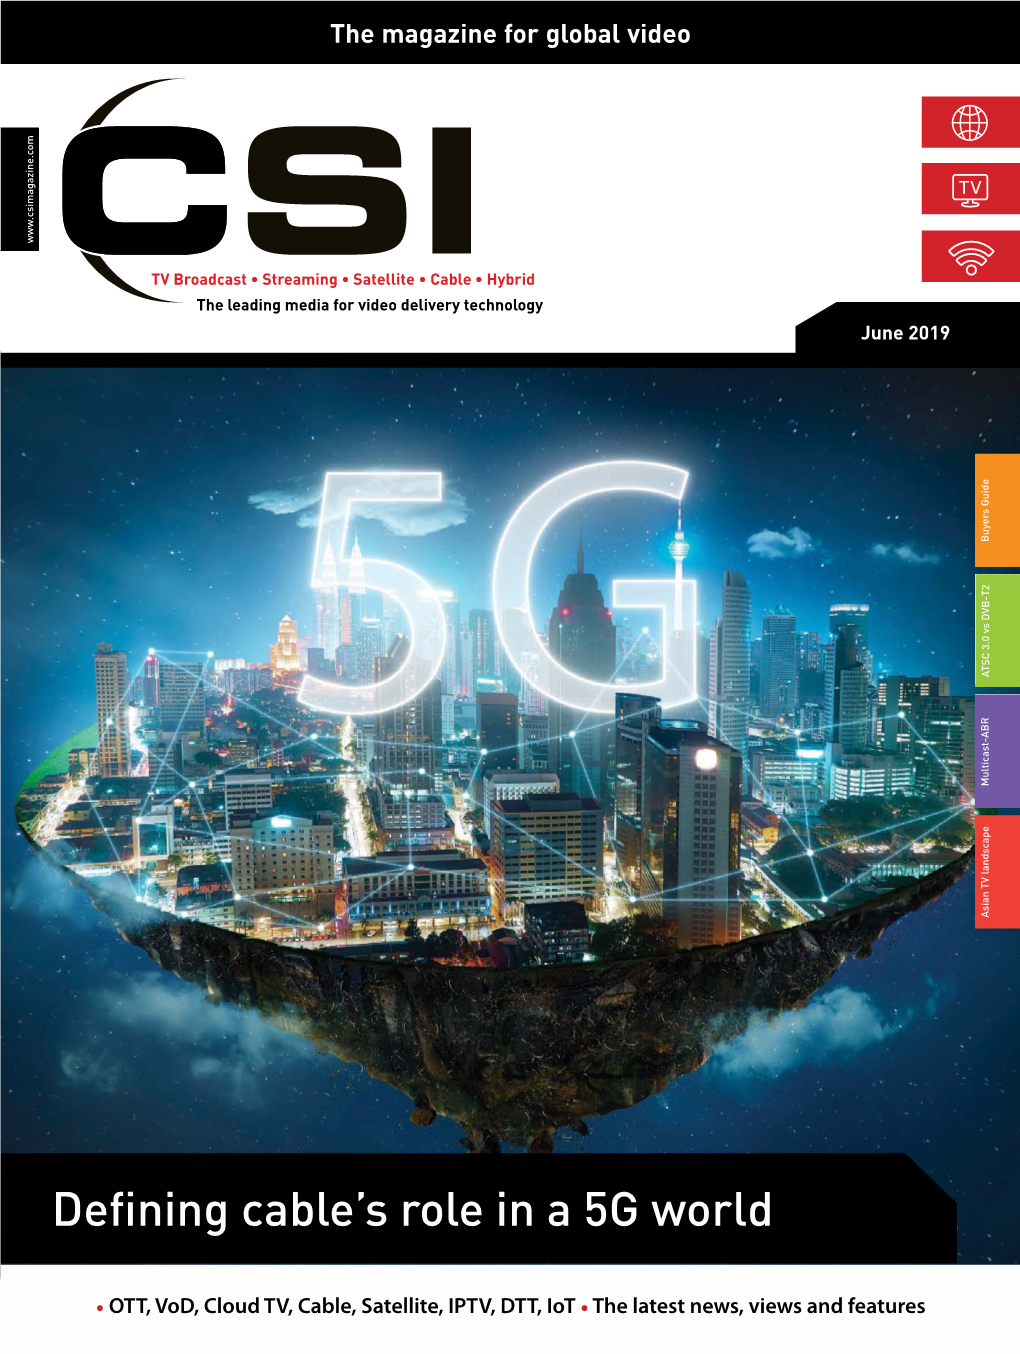 Defining Cable's Role in a 5G World